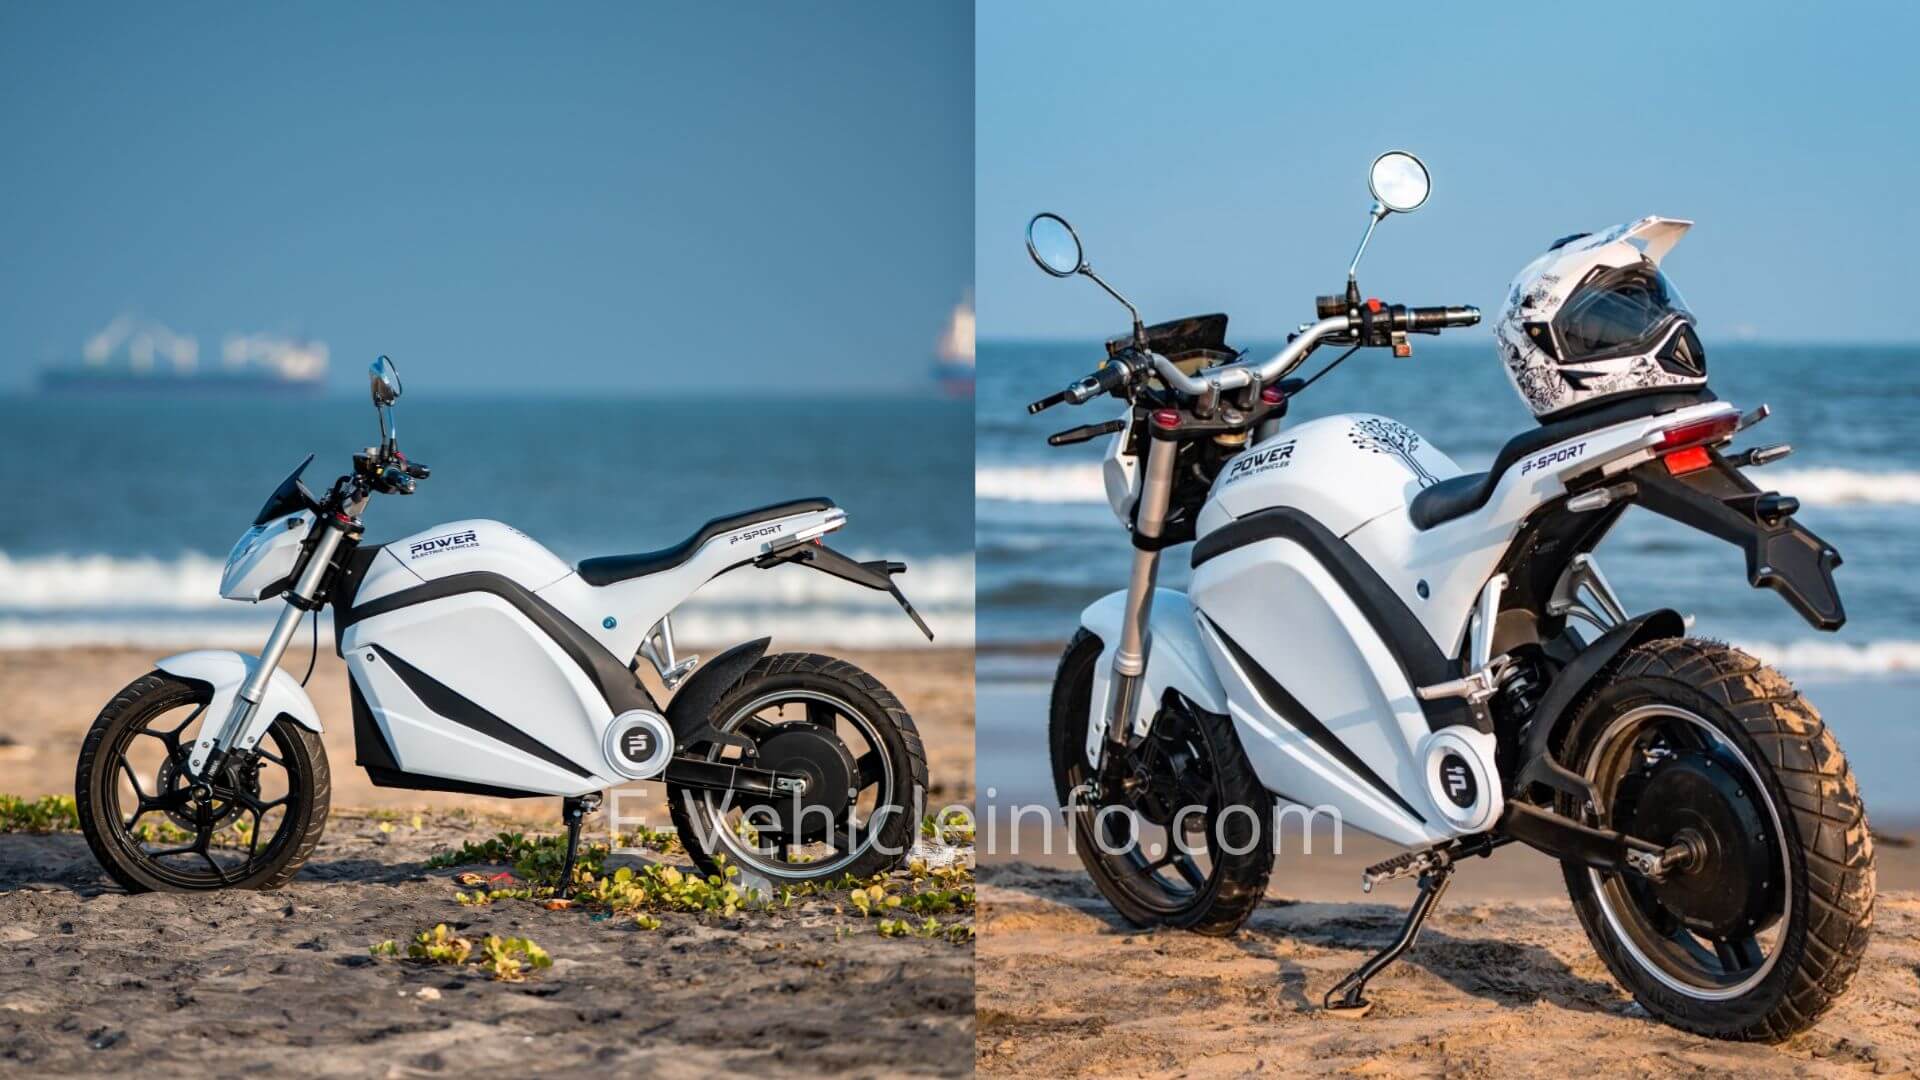 Power EV P-Sport Electric Motorcycle Price, & Launch E-Vehicleinfo